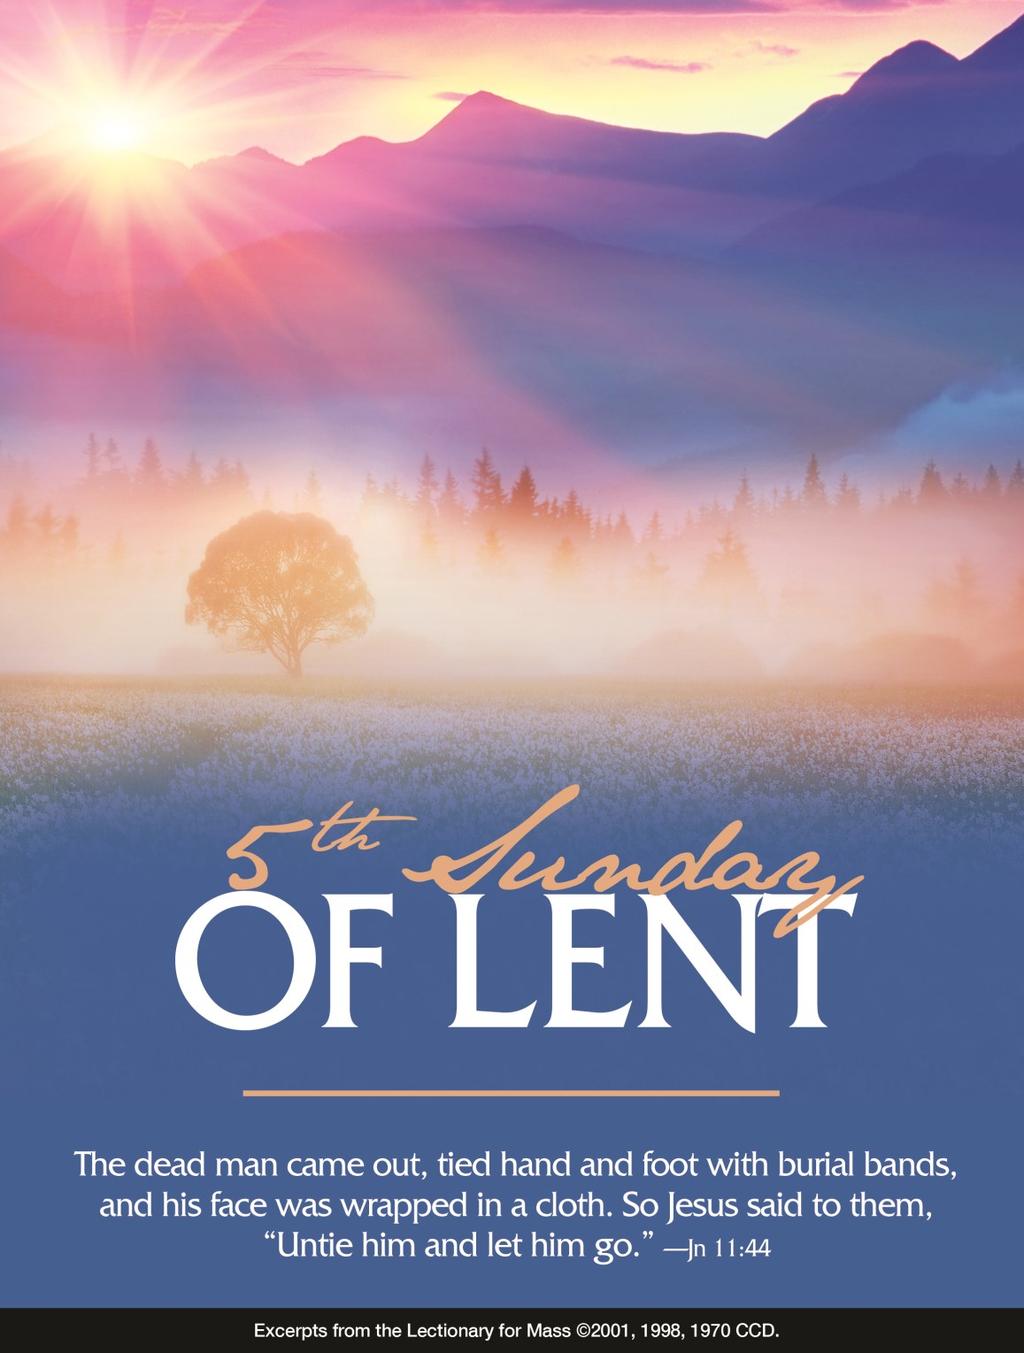 That understanding and acceptance and rejoicing at the Resurrection is what Lent has been about and what our preparations in these final days of Lent should be about as well.